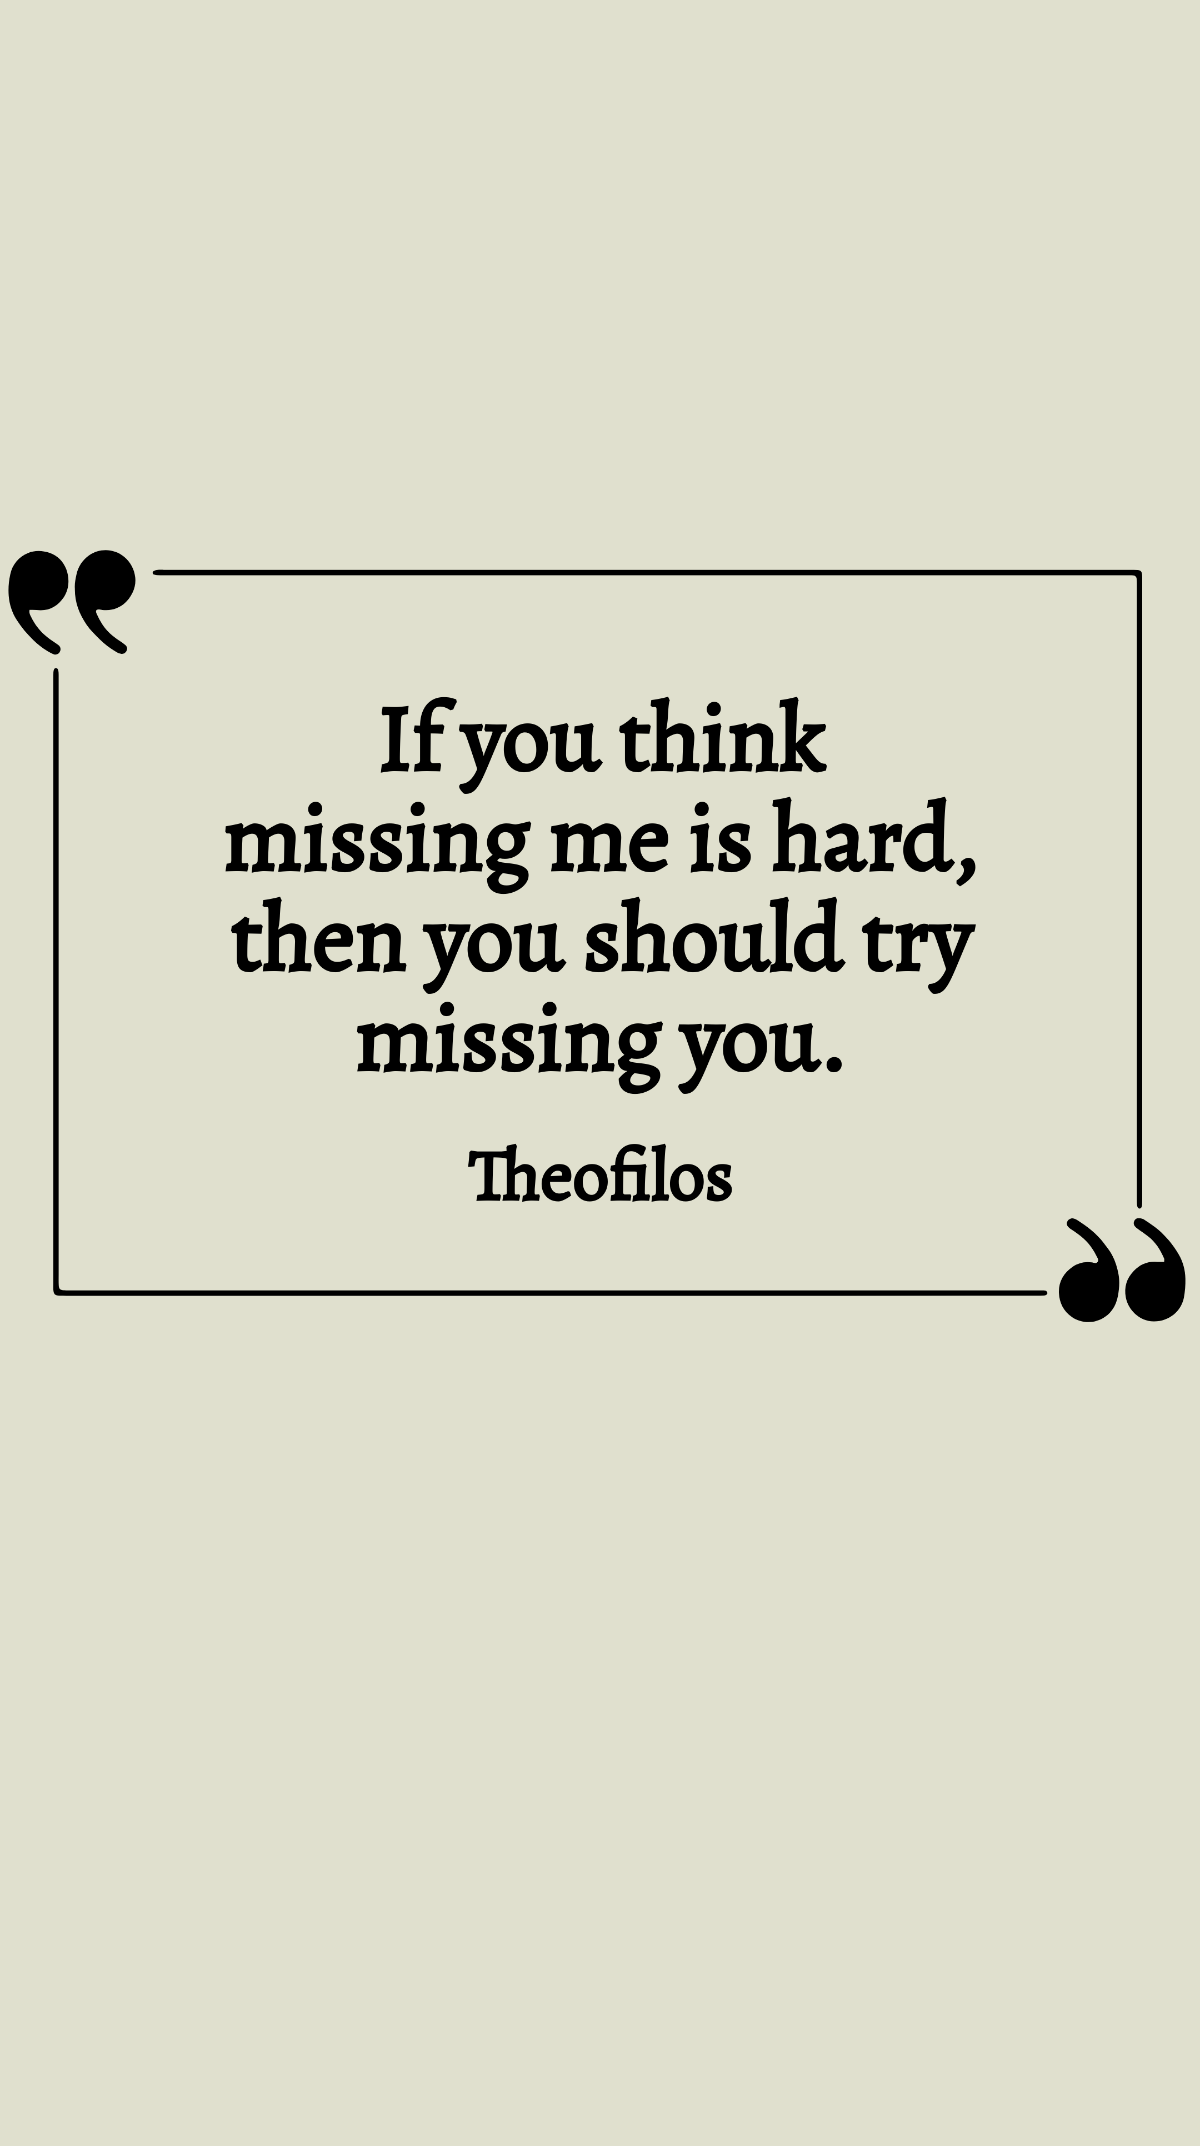 Theofilos - If you think missing me is hard, then you should try missing you.